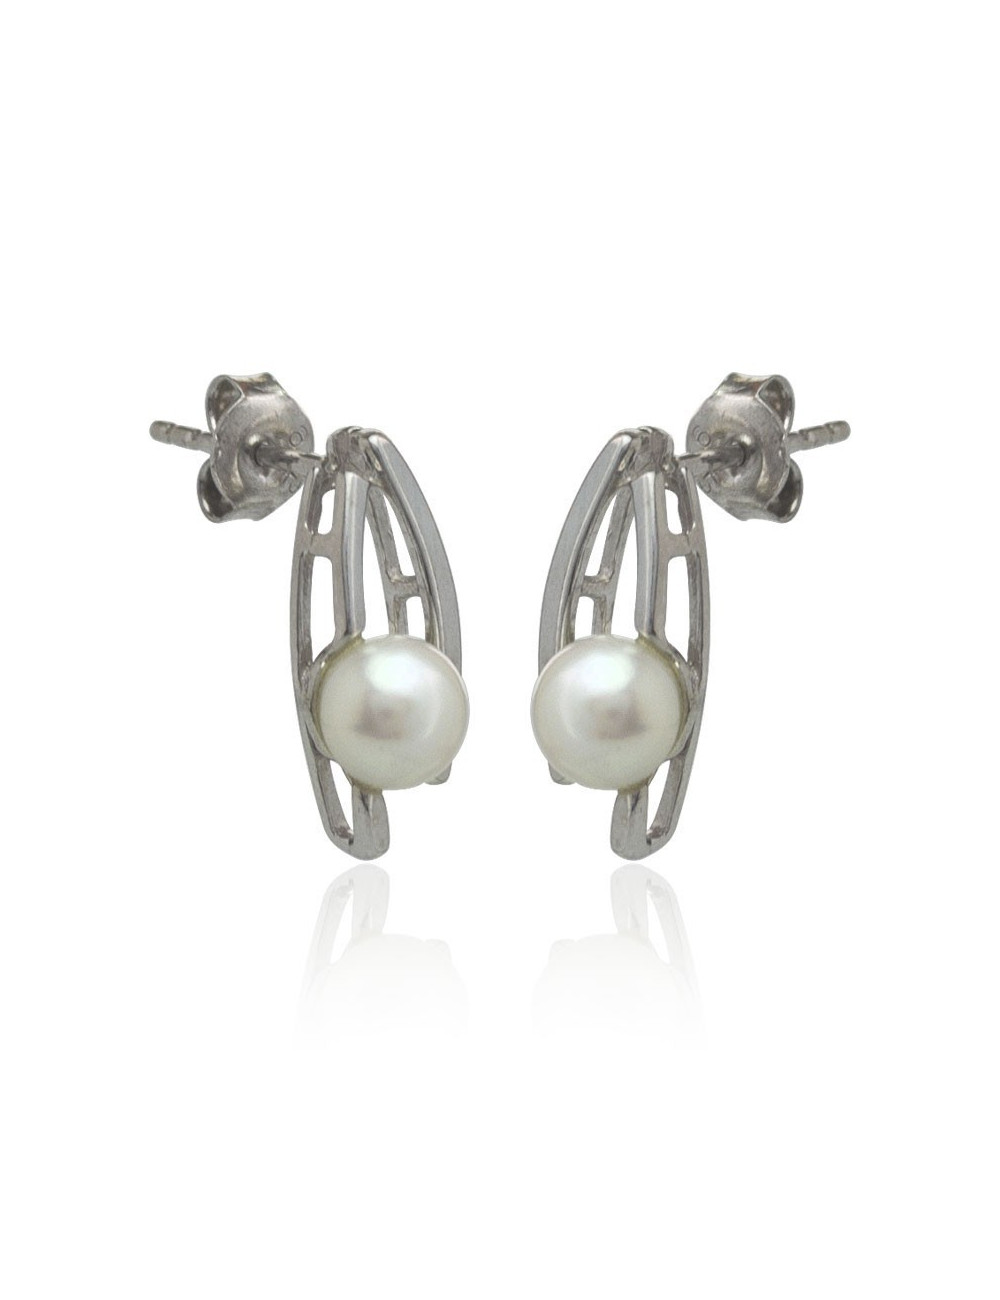 Silver earrings with pearls ZIE0746S